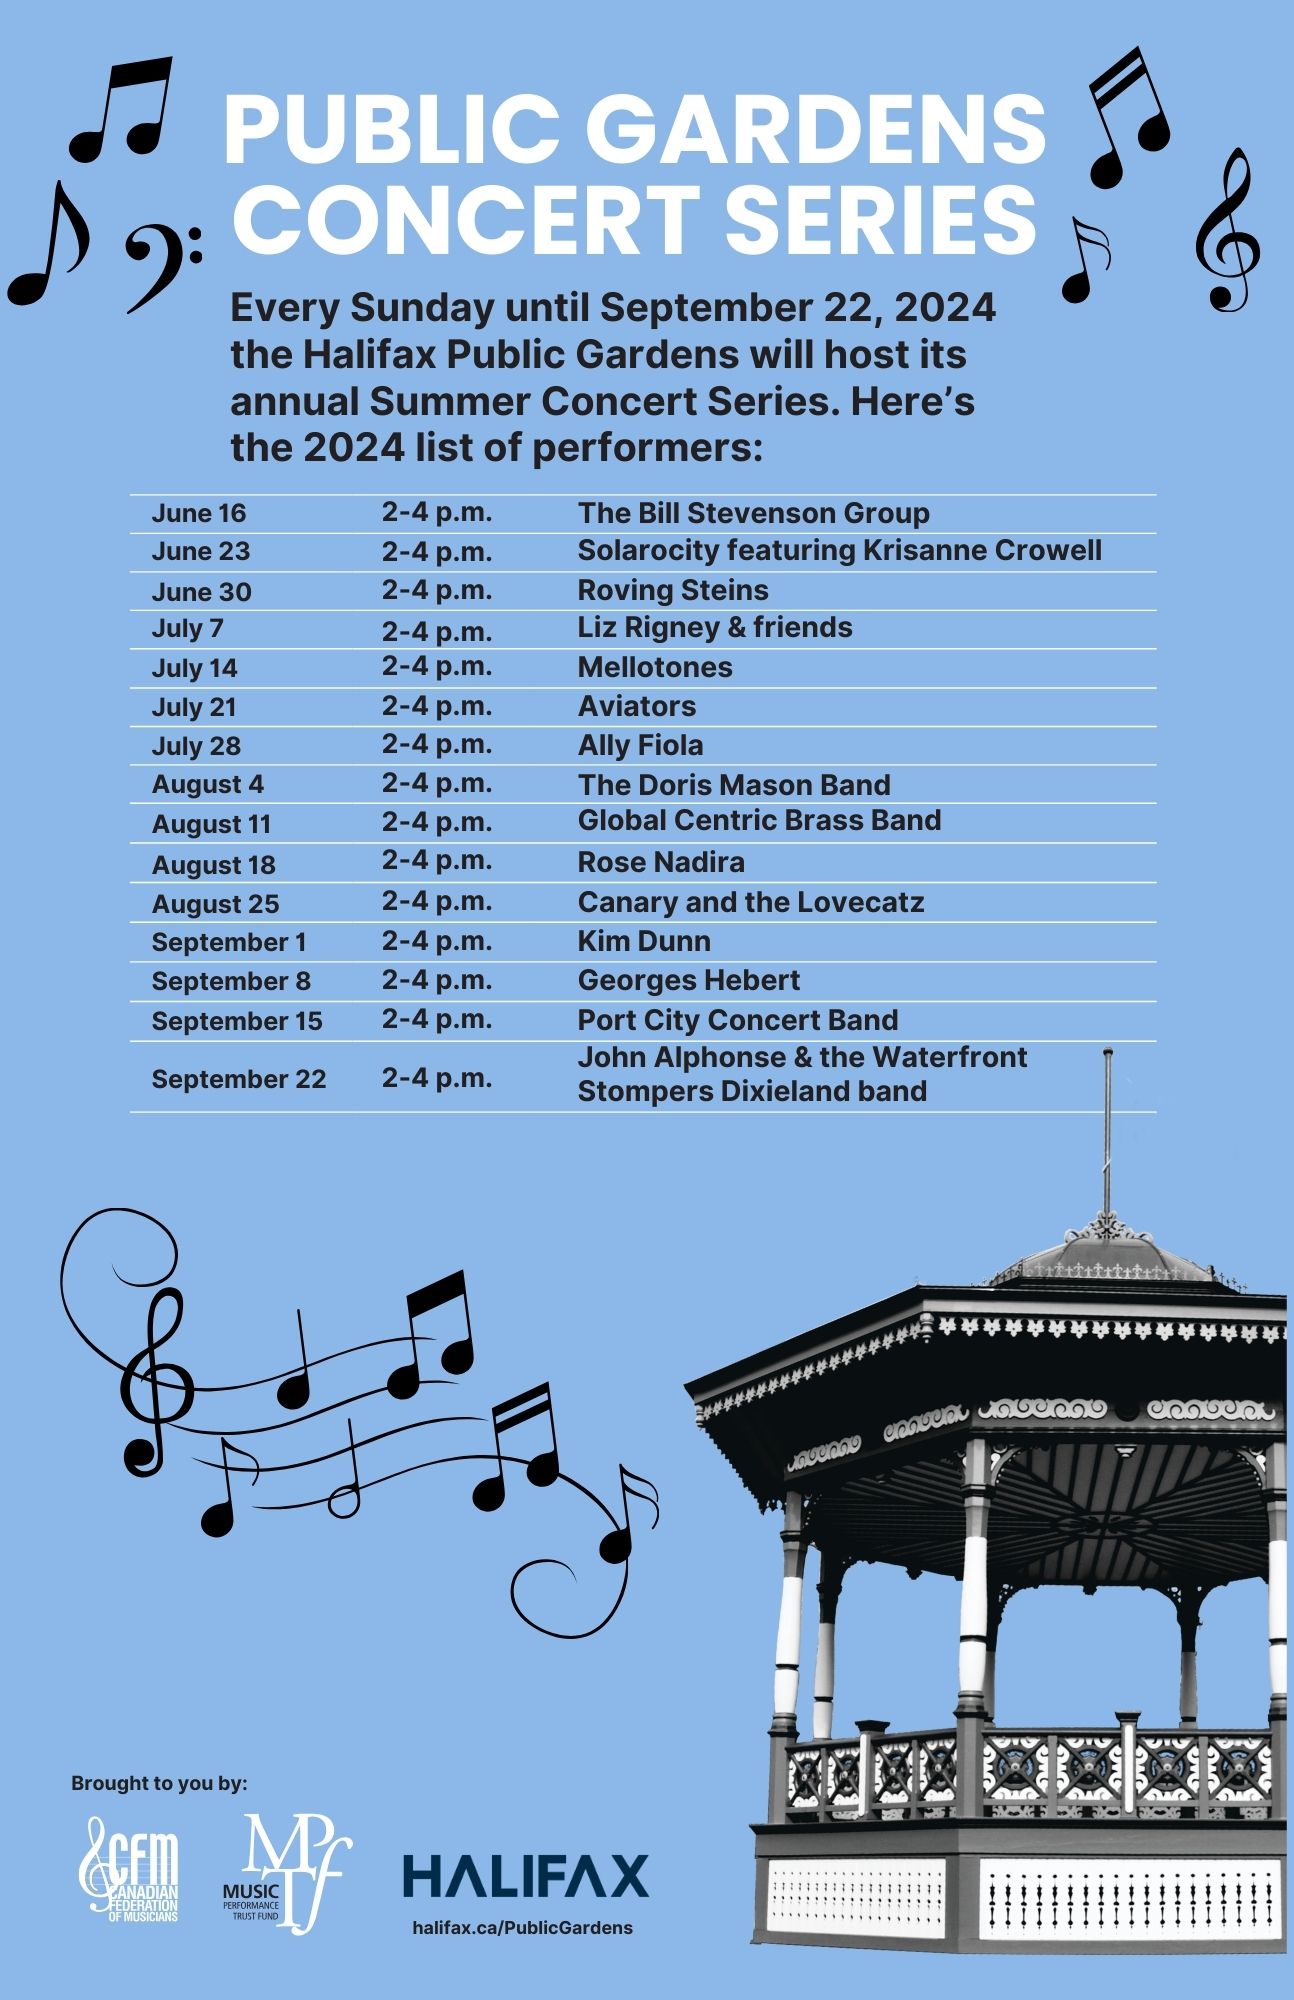 Sunday concert series event poster